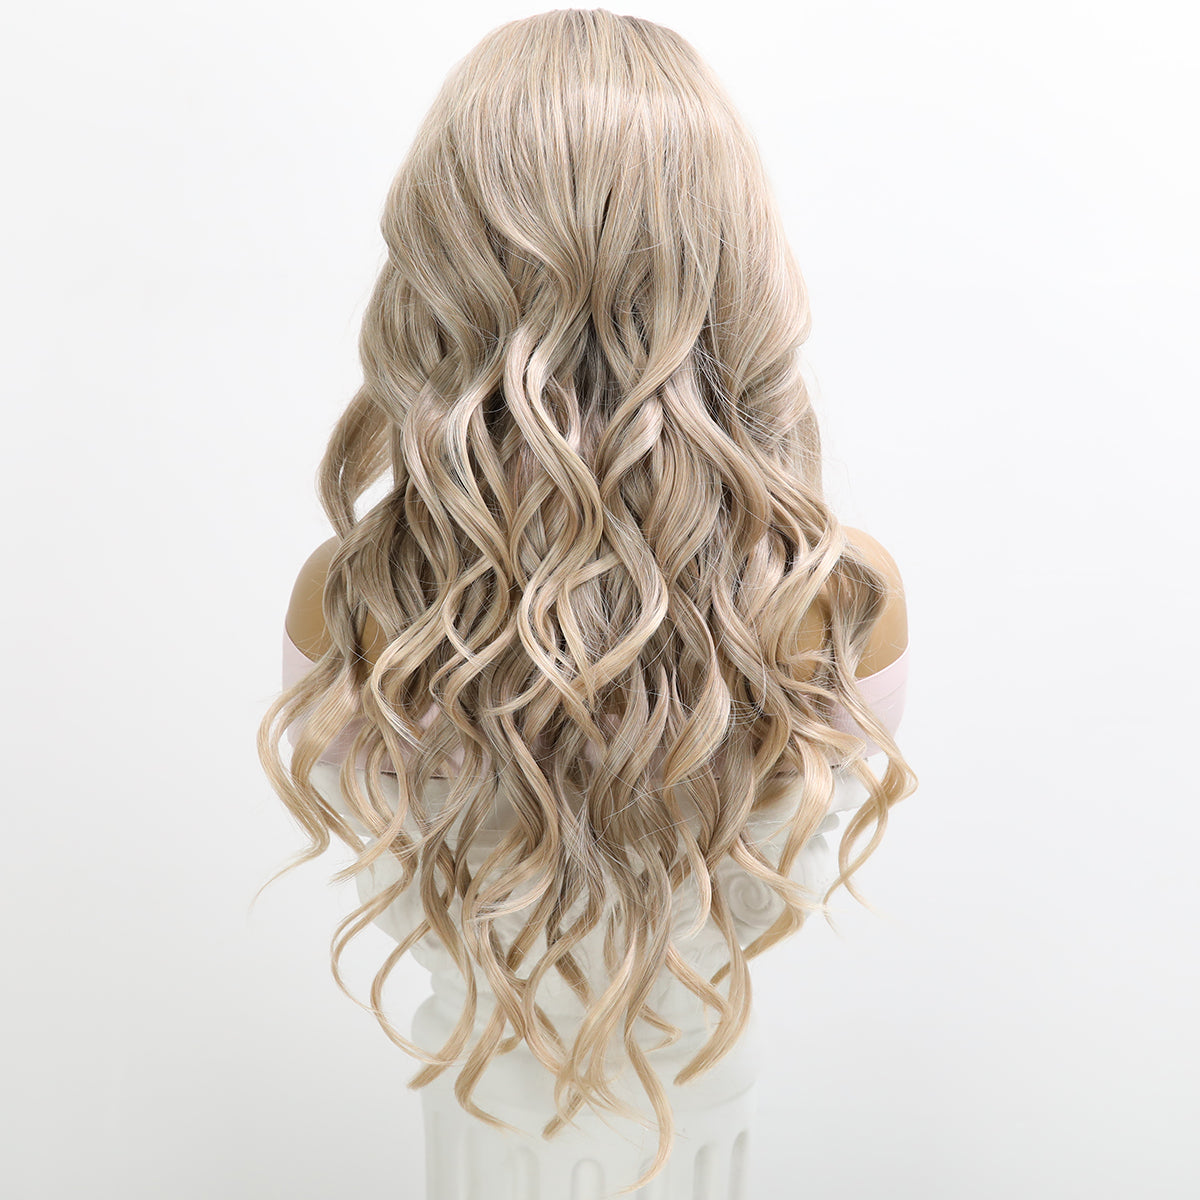 [Moonlit Mist] 28-inch Ombre Blonde Loose Wave without Bangs (Synthetic Lace Front Wig)